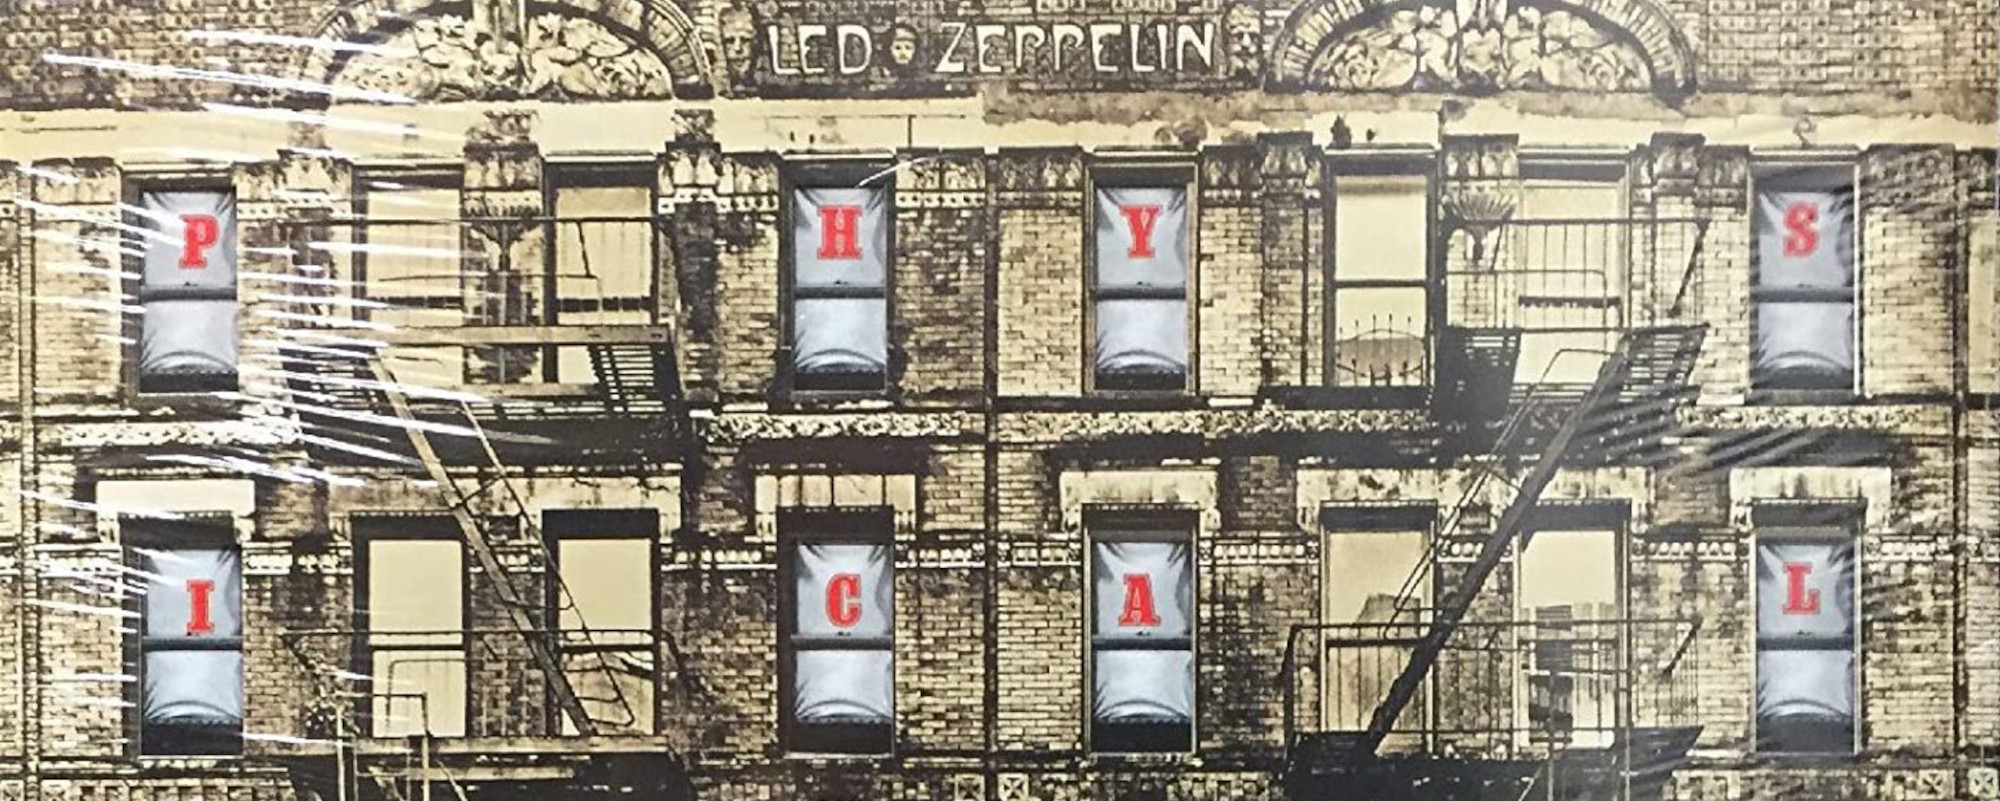 Little Known Behind Zeppelin's Graffiti' Album Cover